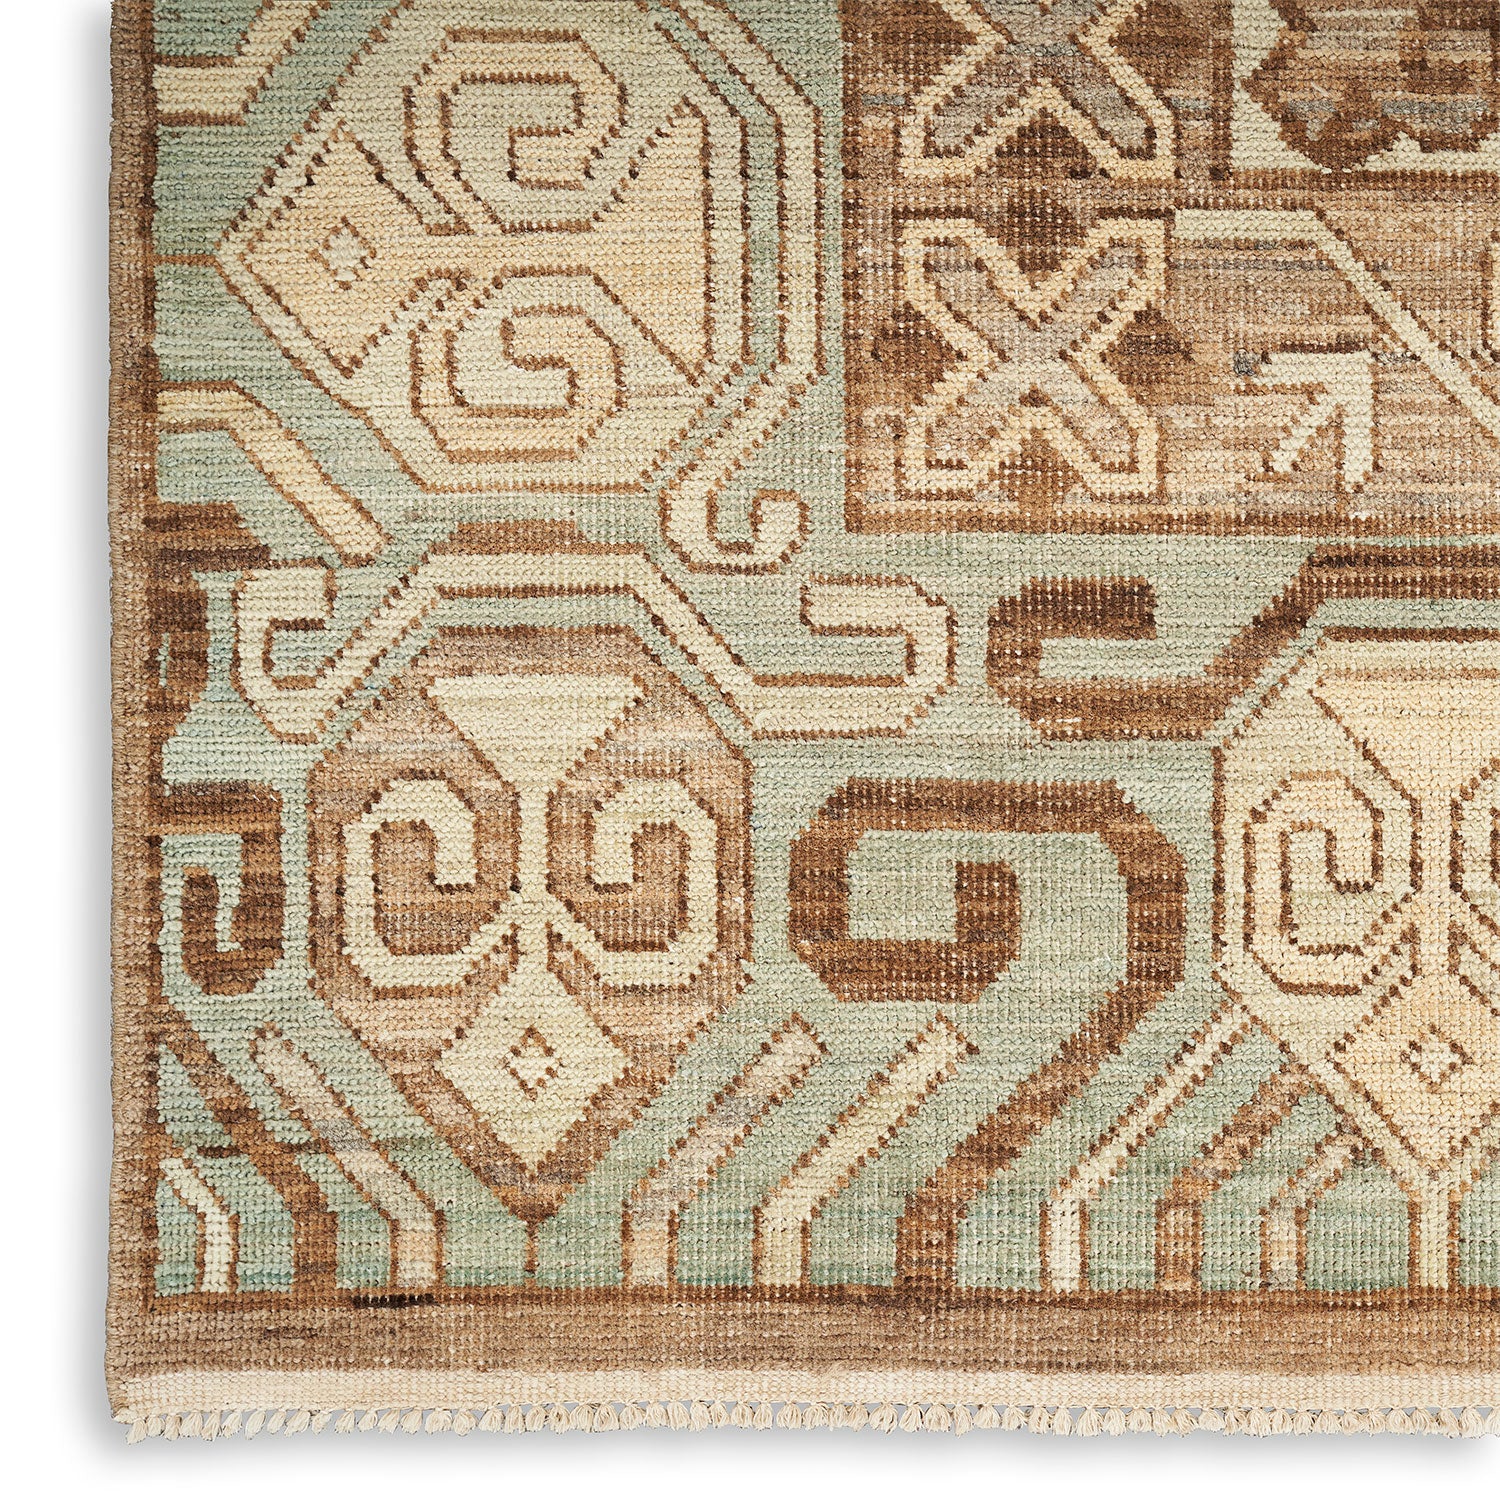 Exquisite hand-woven textile showcases intricate geometric patterns in earthy tones.